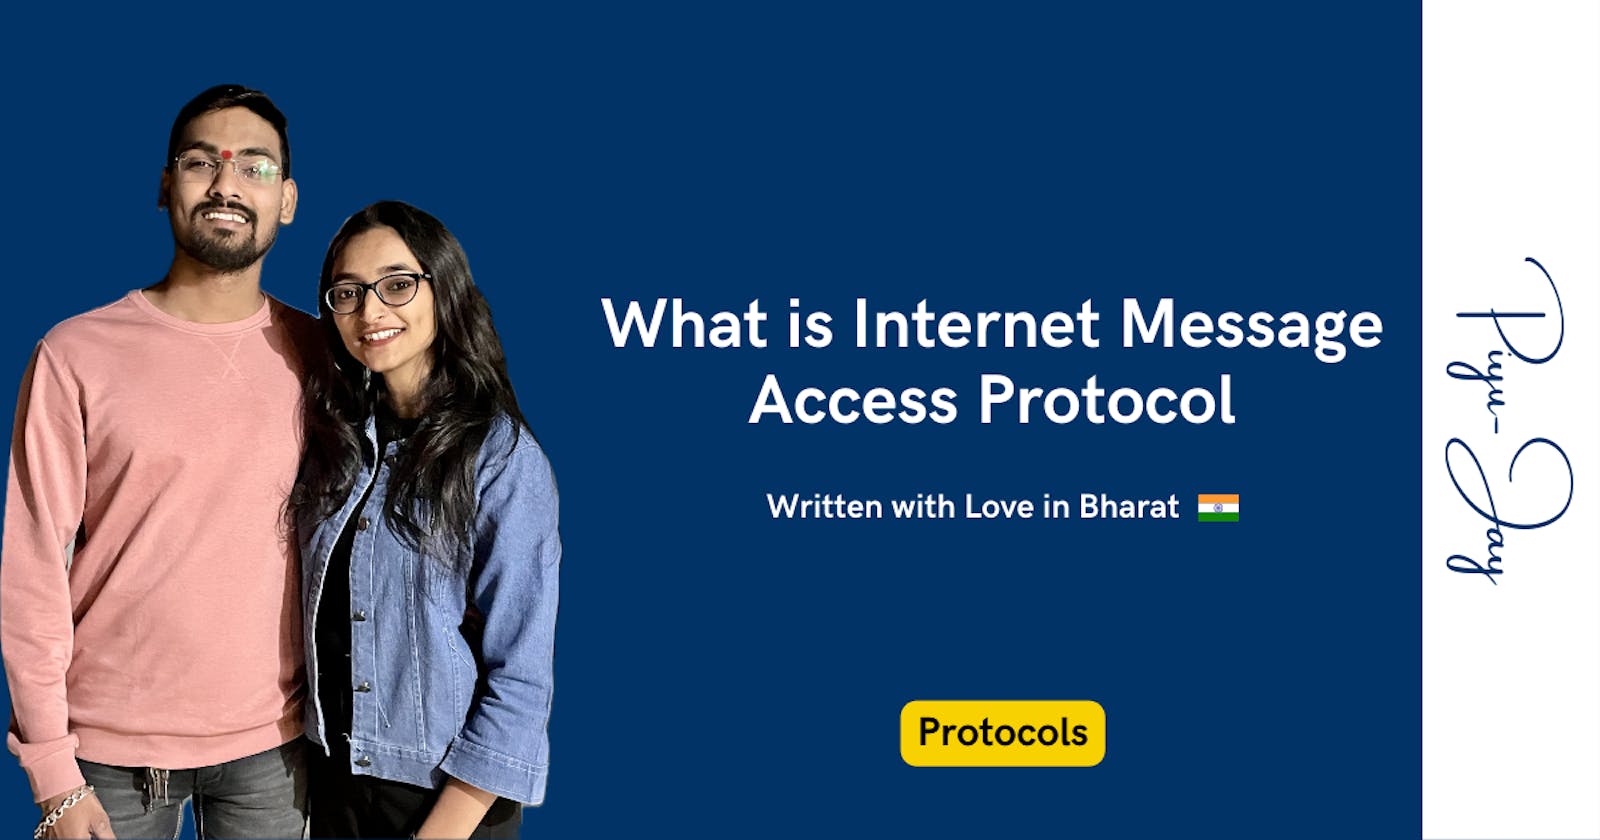 What is Internet Message Access Protocol (IMAP)?